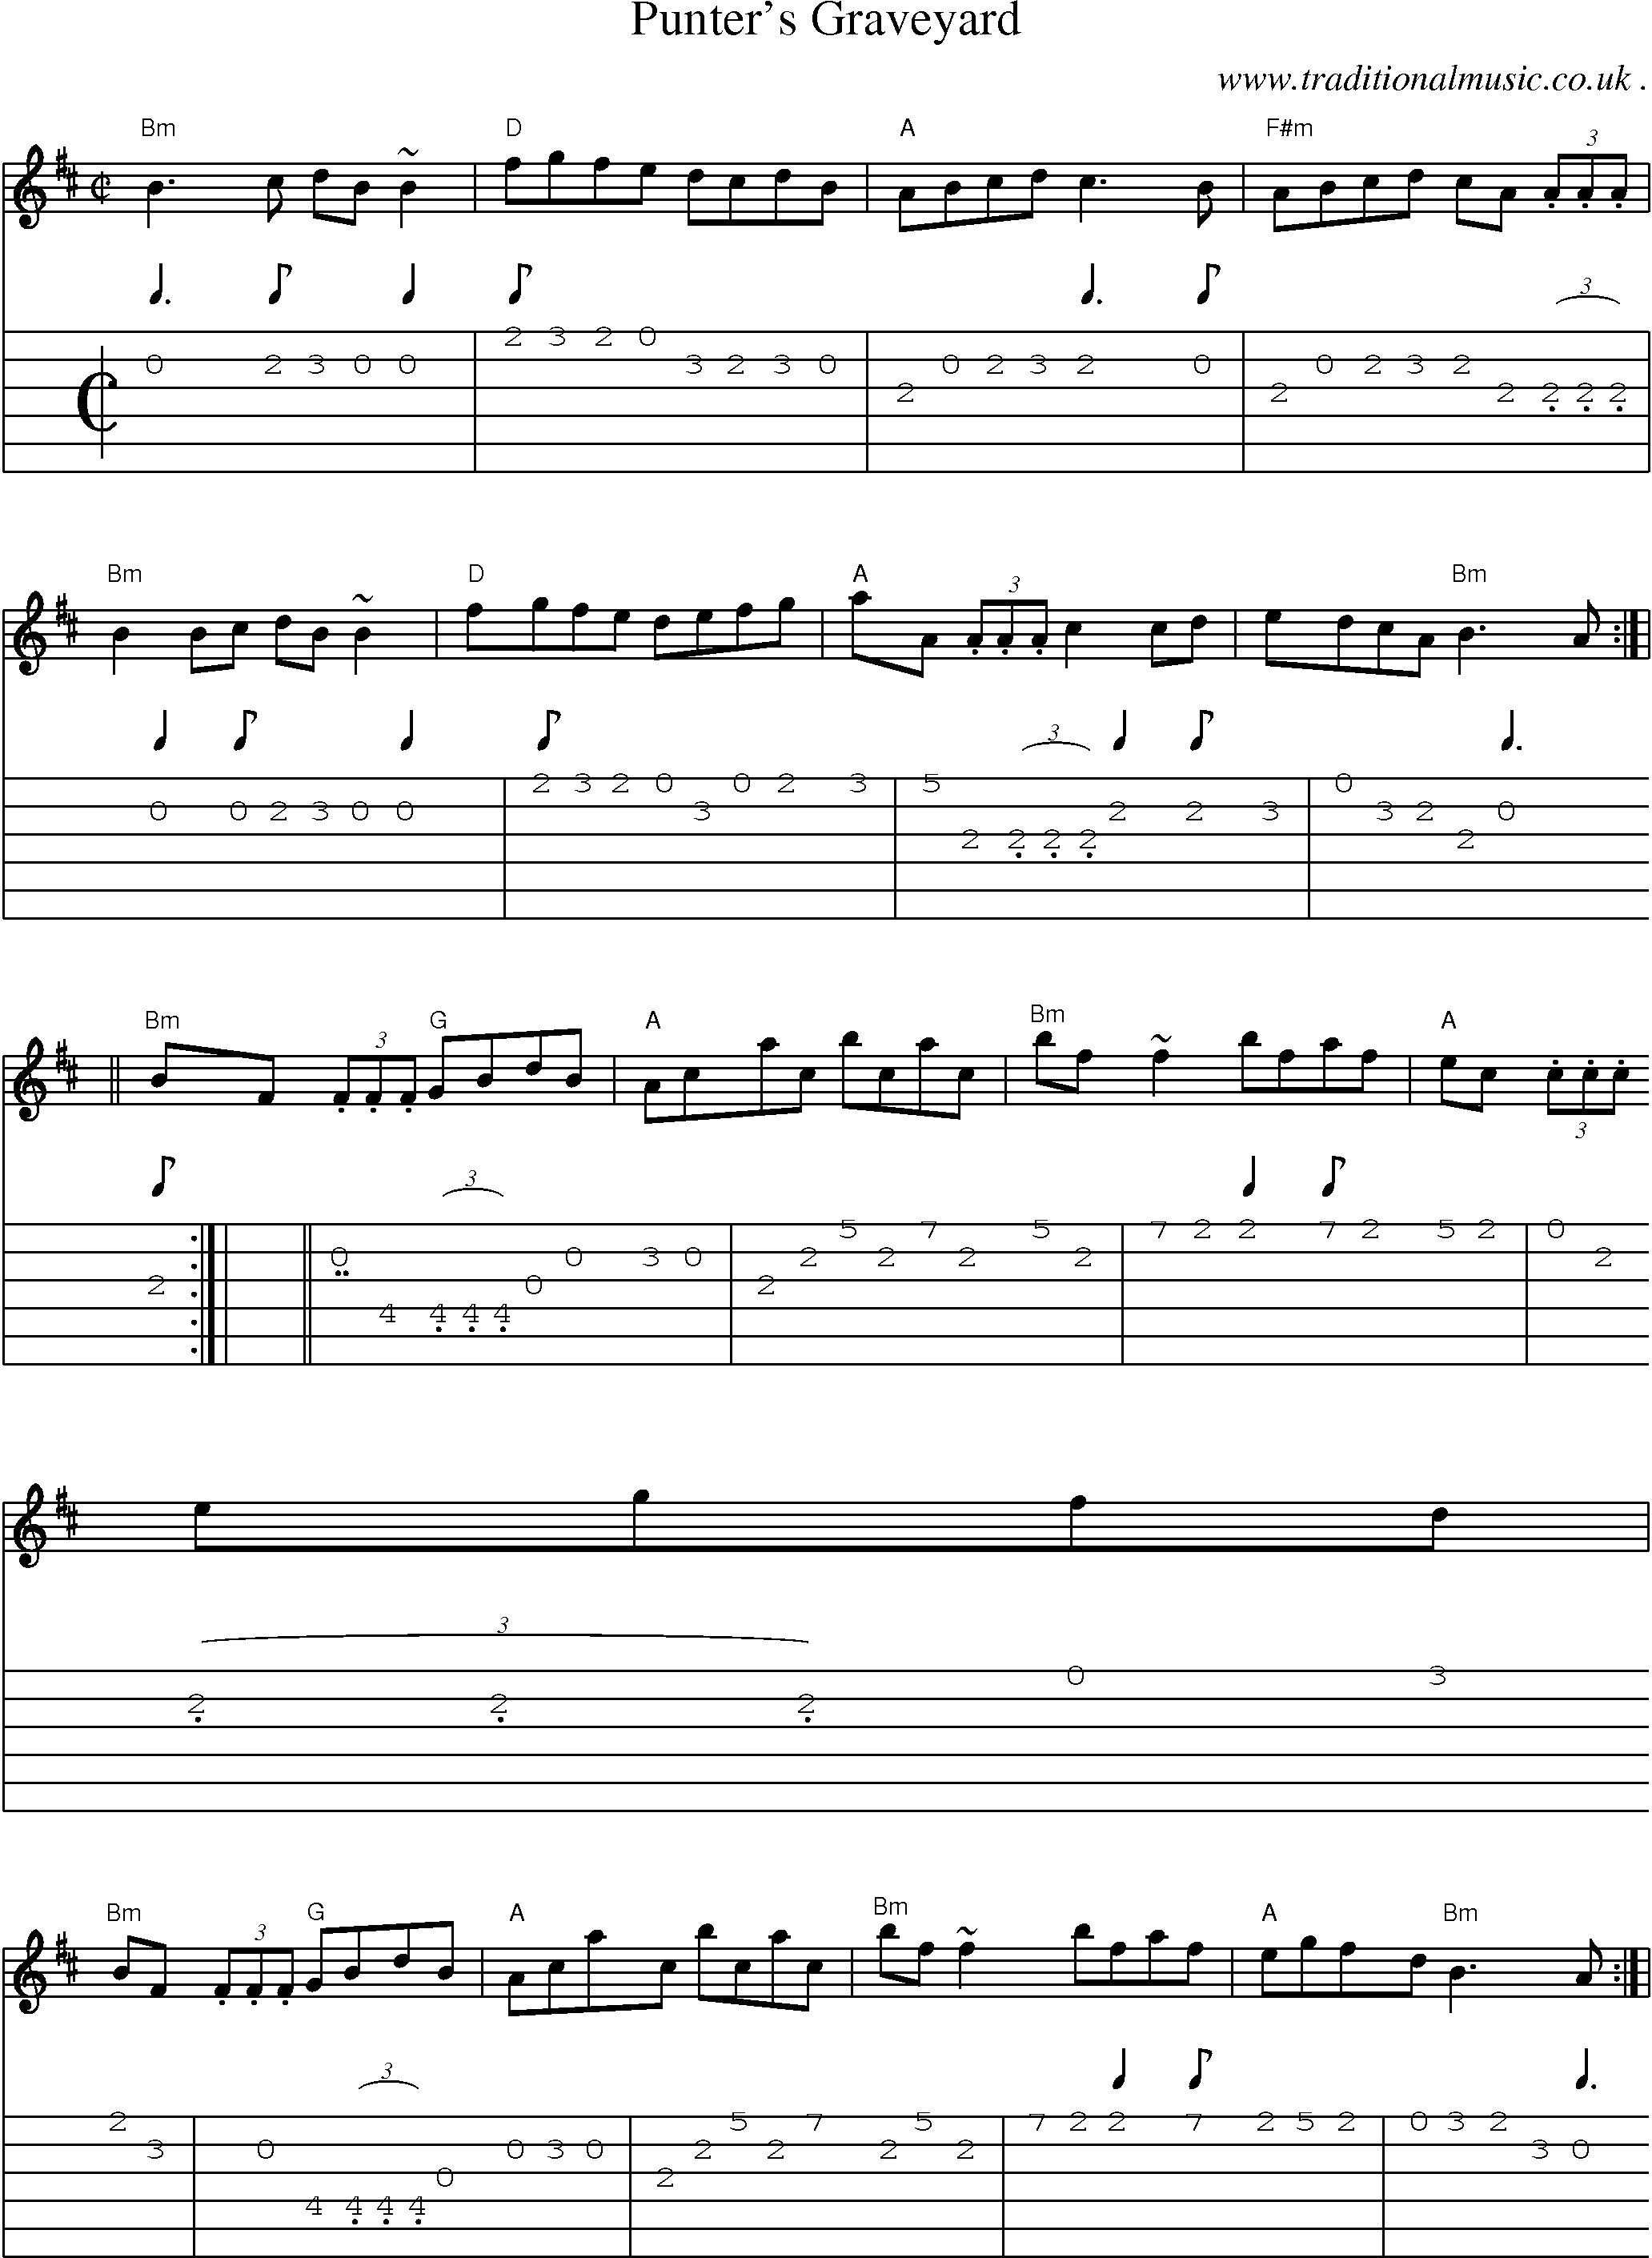 Sheet-music  score, Chords and Guitar Tabs for Punters Graveyard